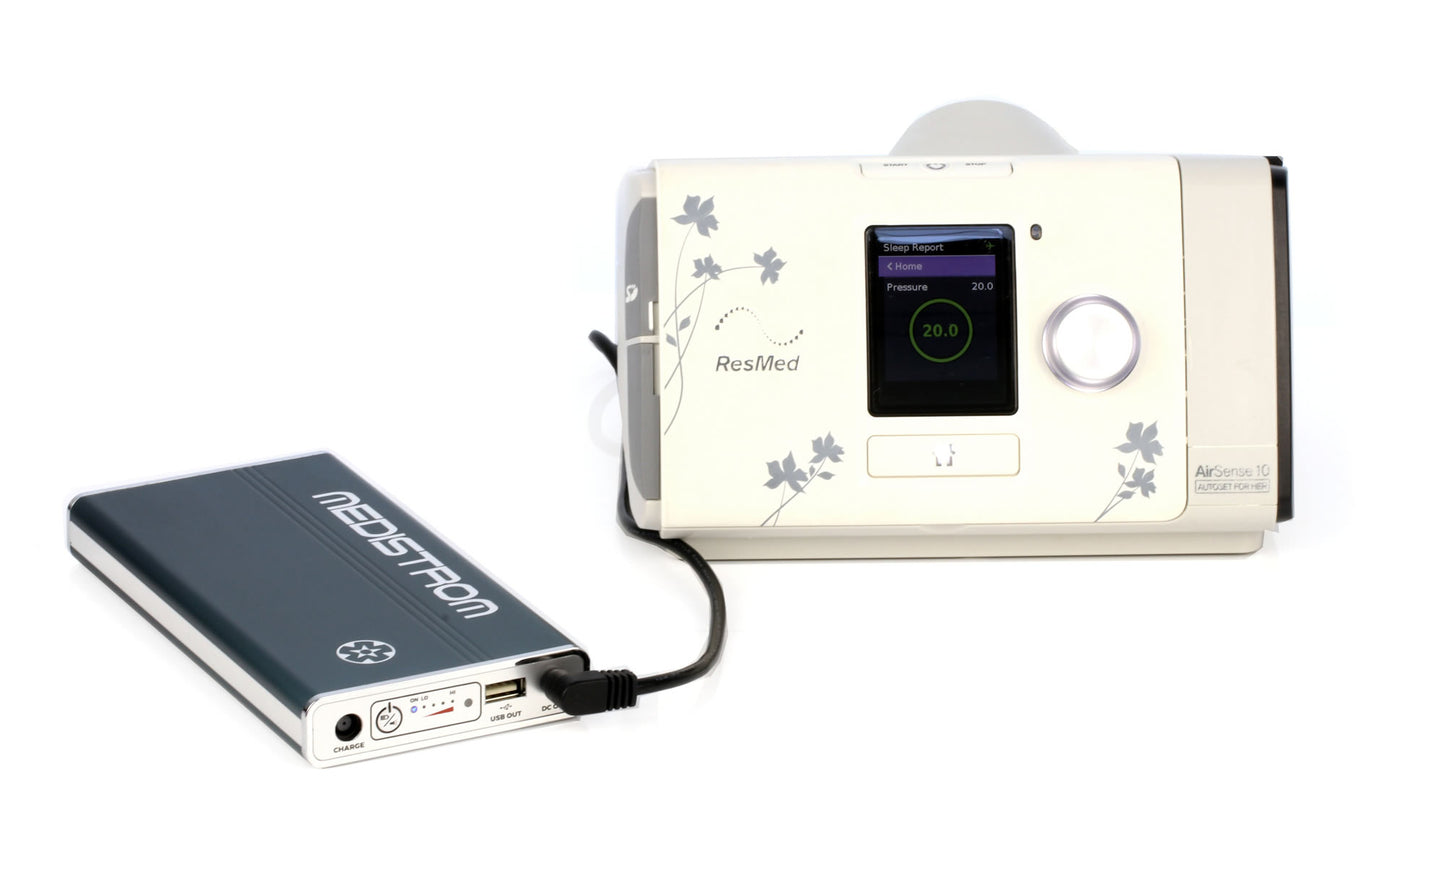 Medistrom™ Pilot-24 Lite Battery and Backup Power Supply for 24V PAP Devices.